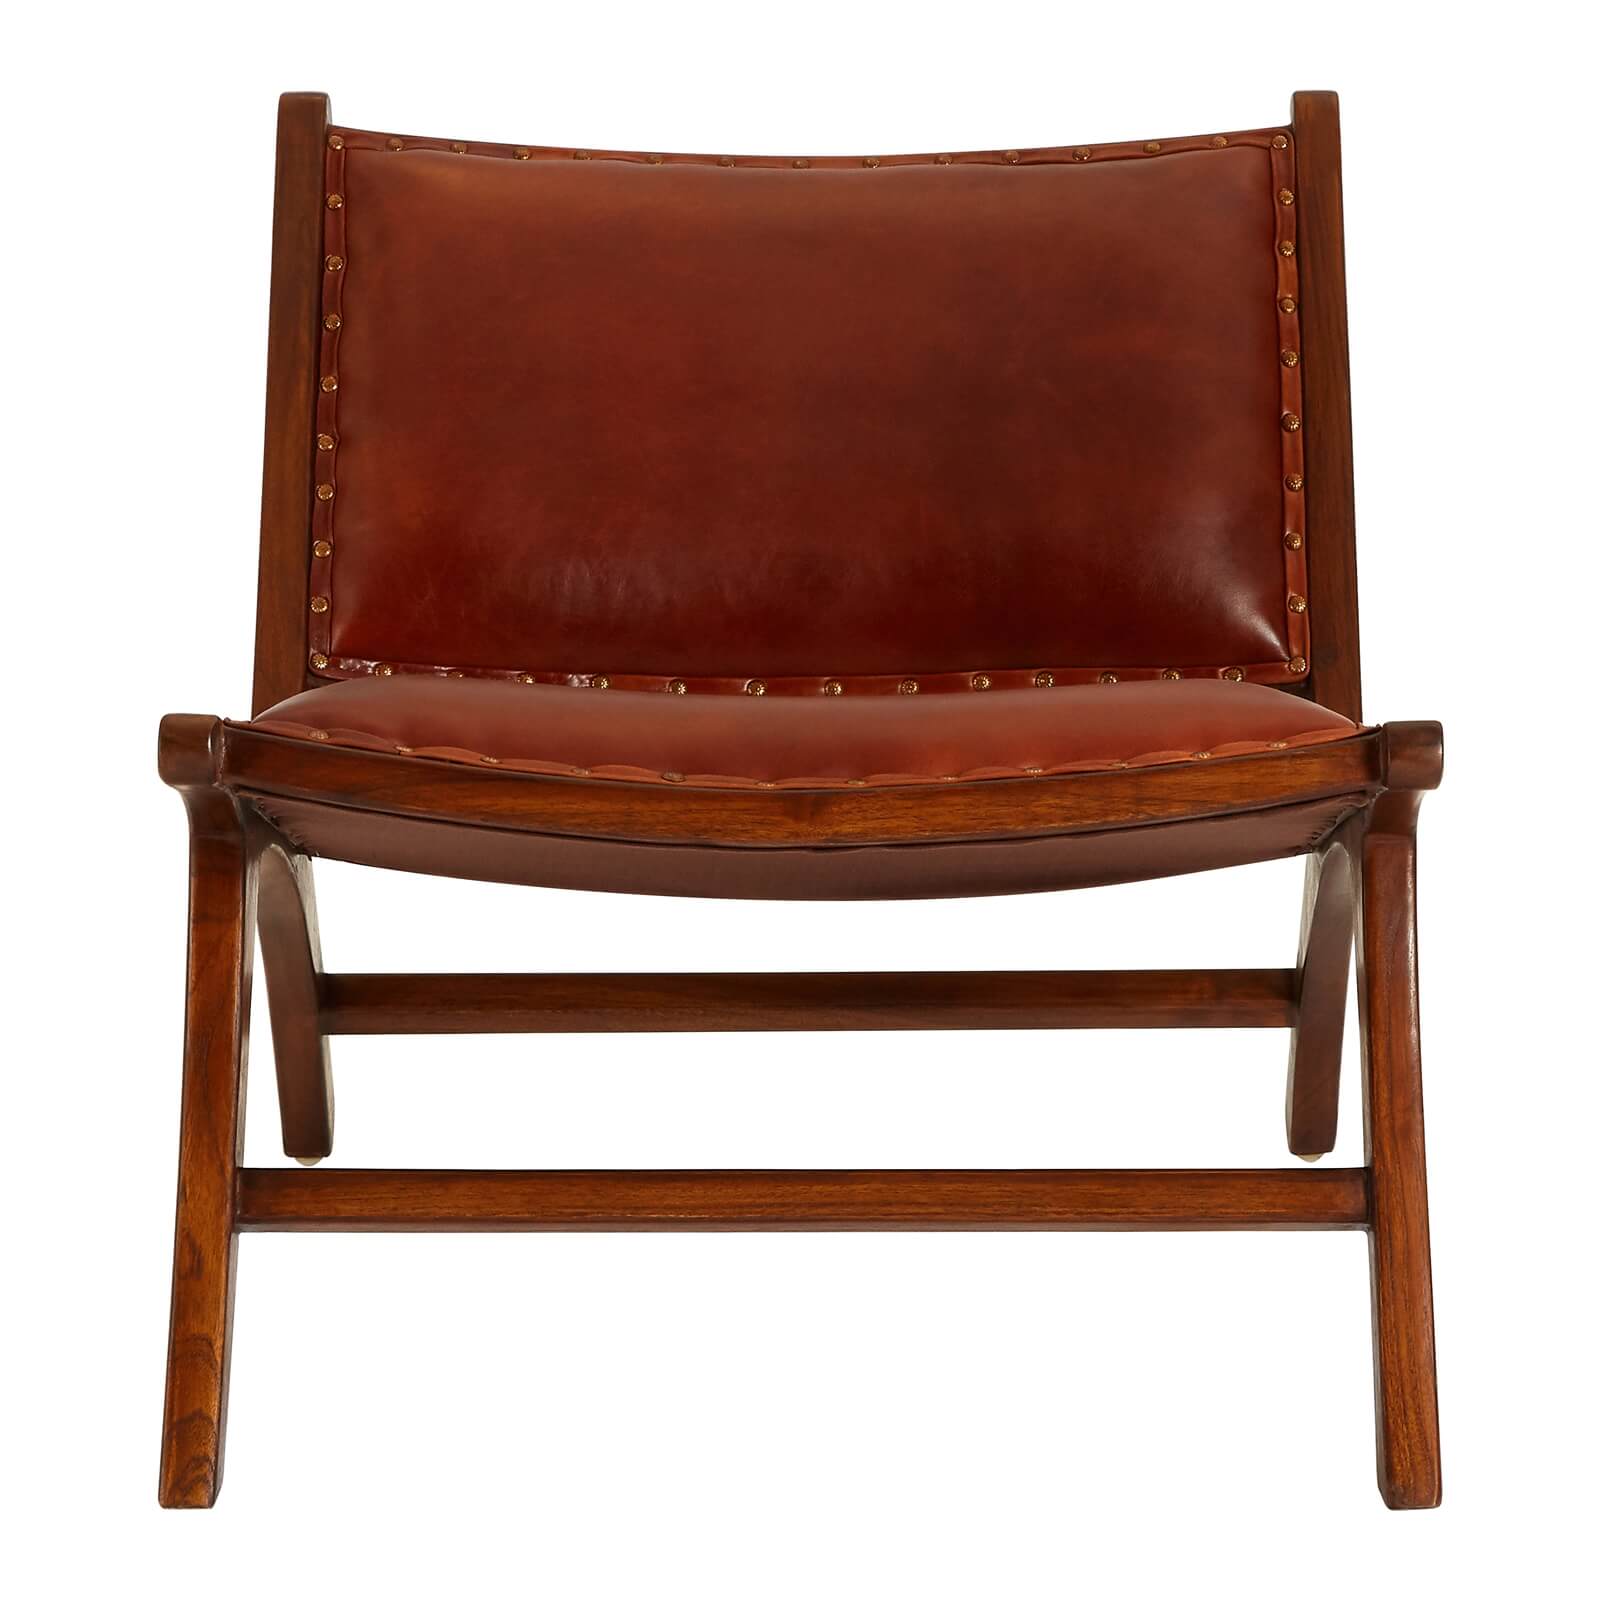 Inca Leather Angled Chair - Antique Brown